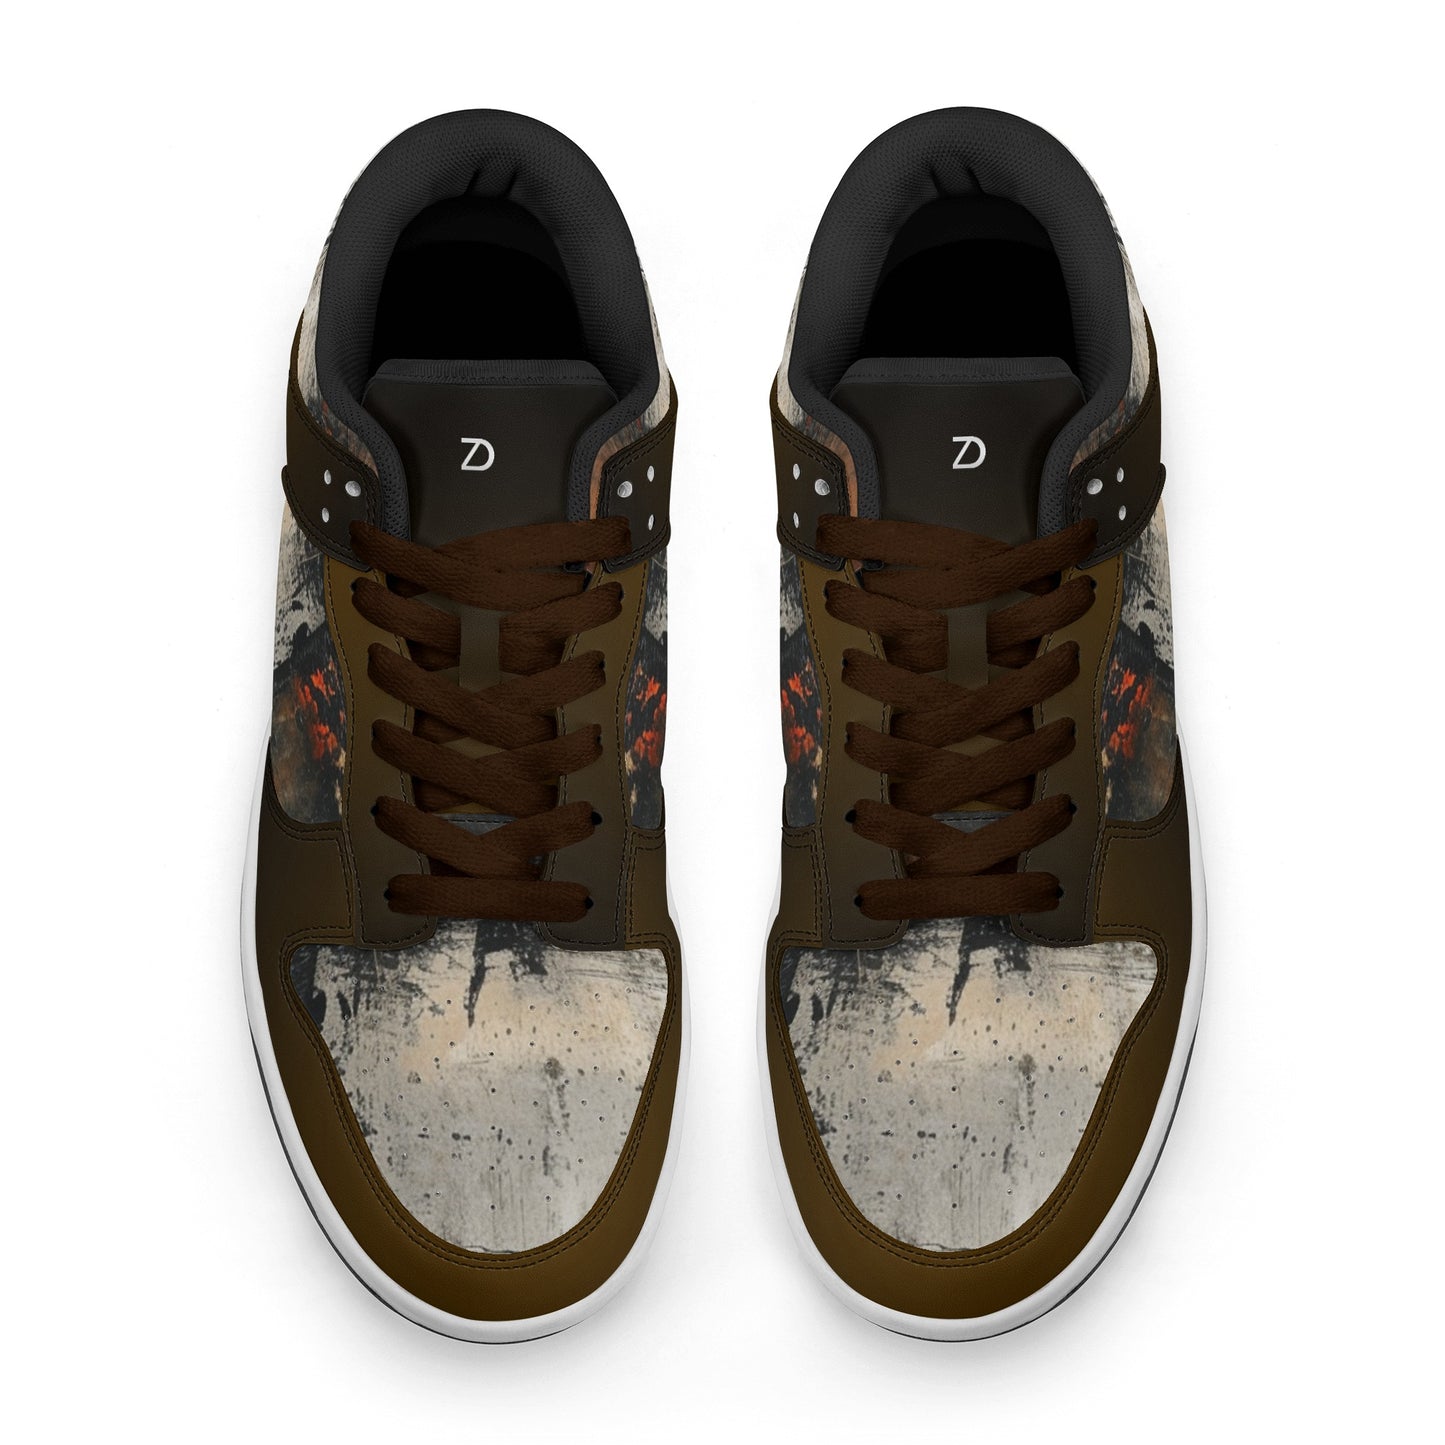 Neduz Artified Dunk Stylish Low Top Leather Sneakers – Abstract Grunge Design